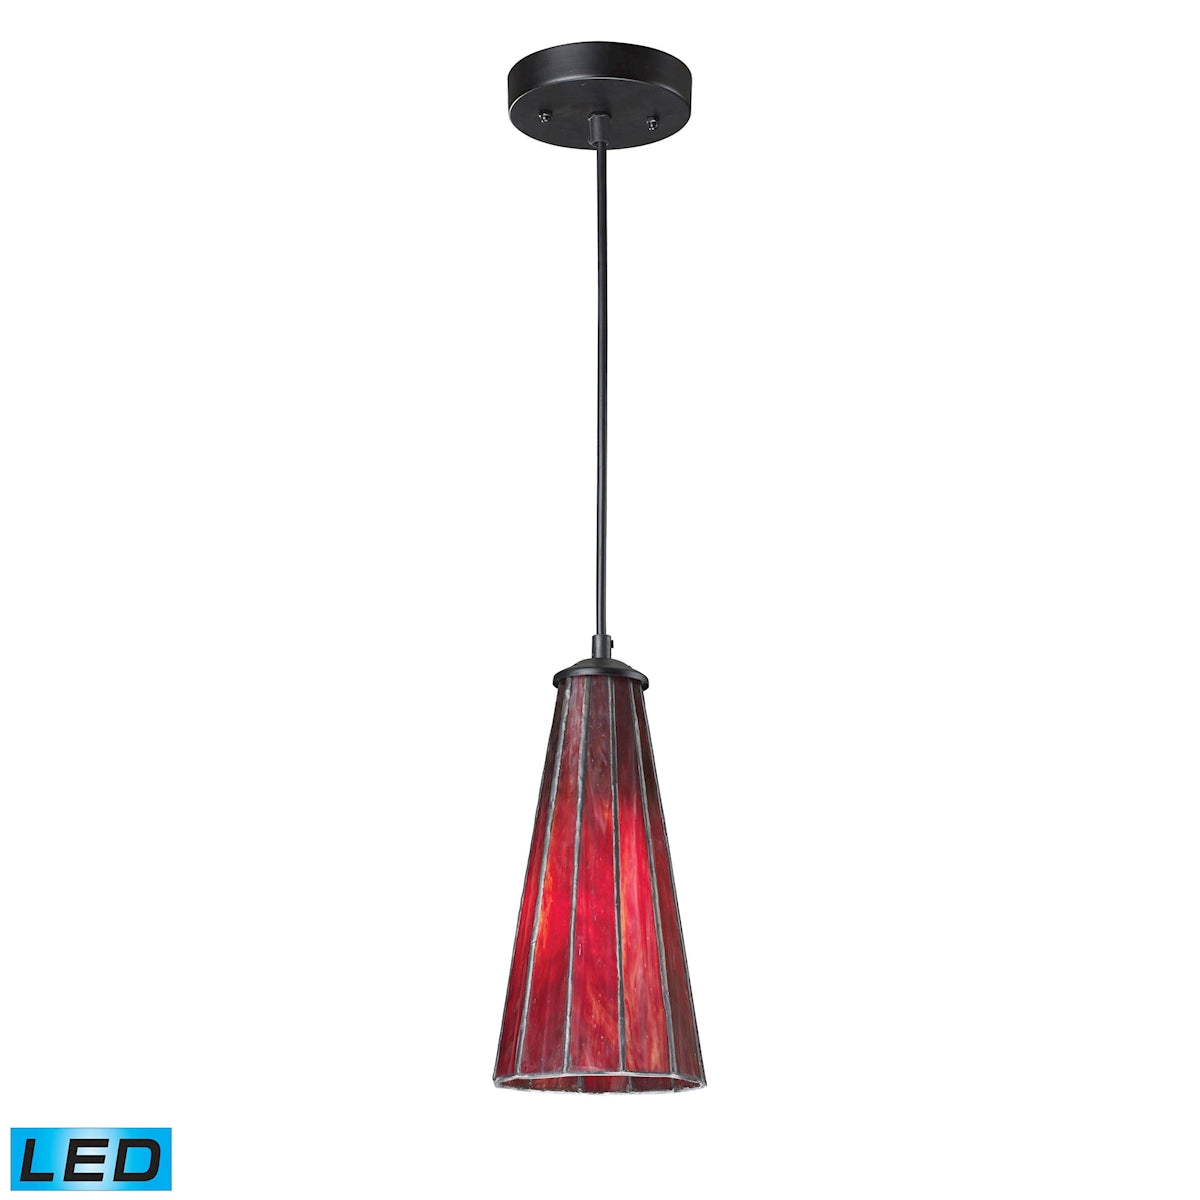 ELK Lighting 70000-1IR-LED Lumino 1-Light Mini Pendant in Matte Black with Inferno Red Shade - Includes LED Bulb